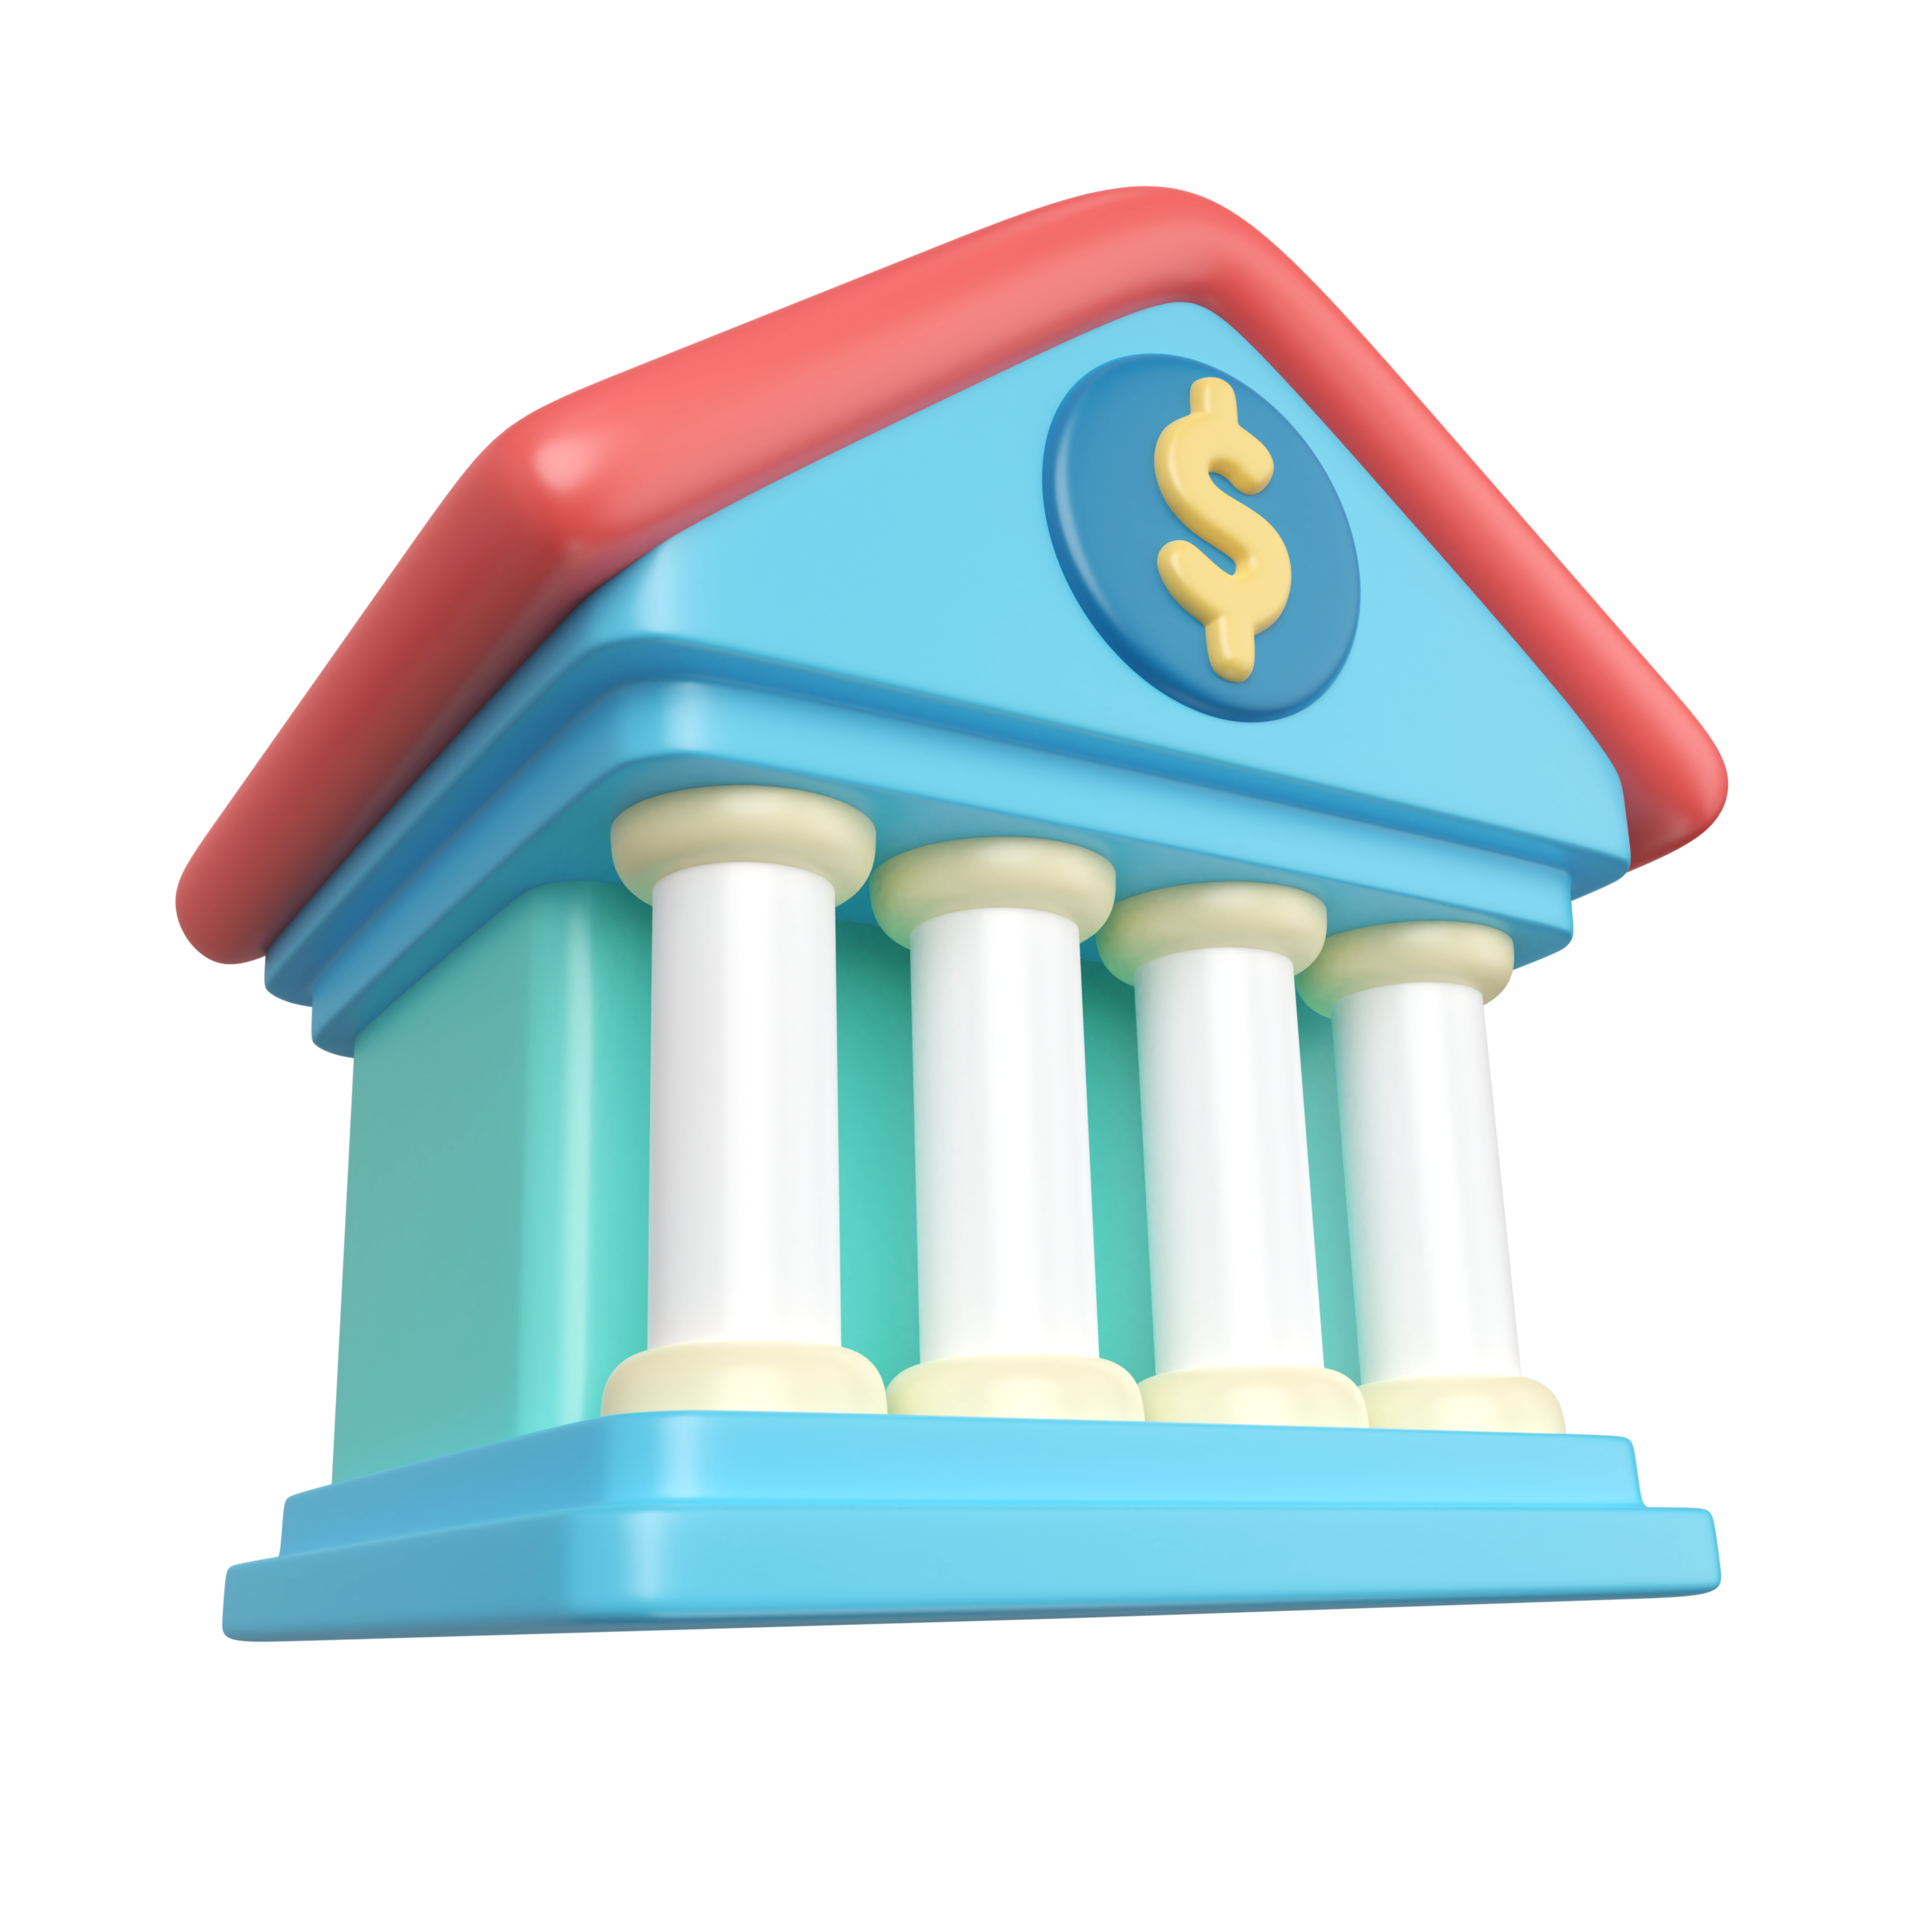 Free Bank 3d Illustration Icon 15214718 Png With Transparent Background